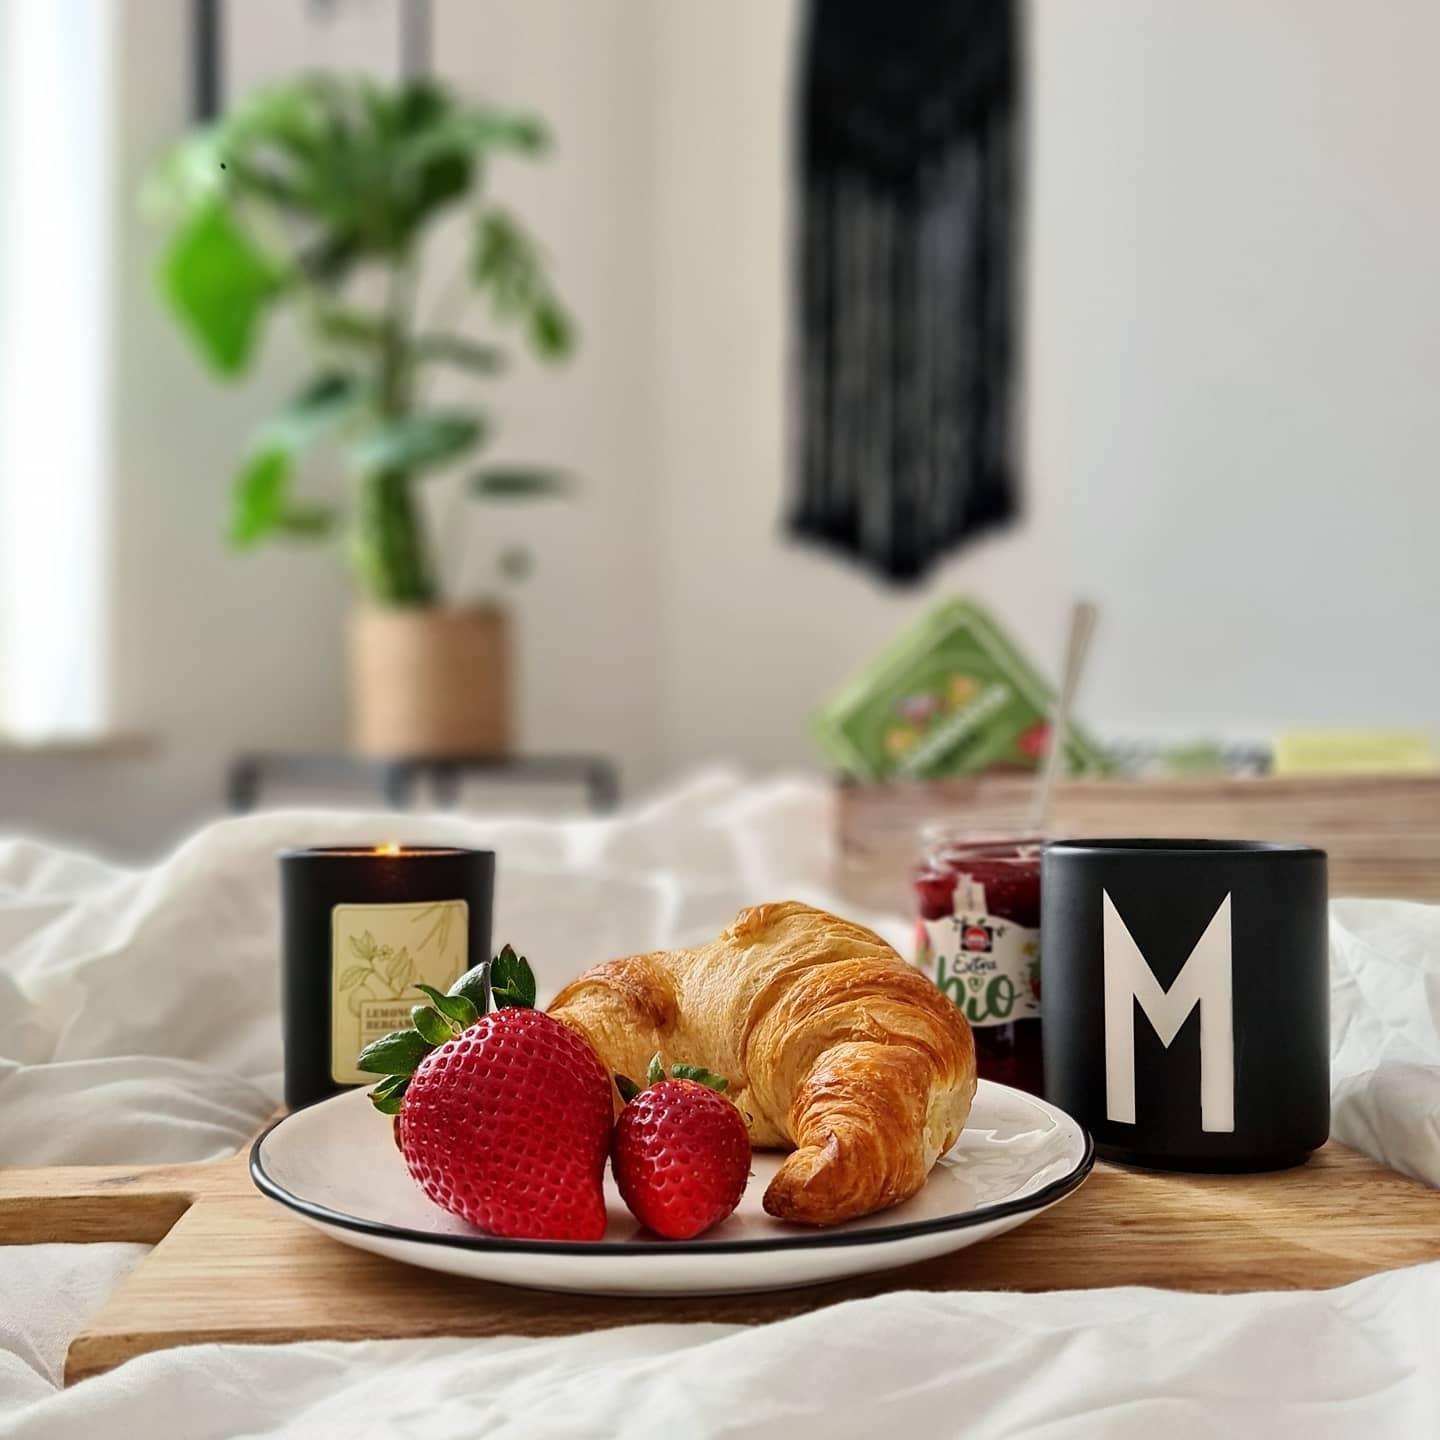 oh sunday 🖤
#breakfast #stayinbed #hygge